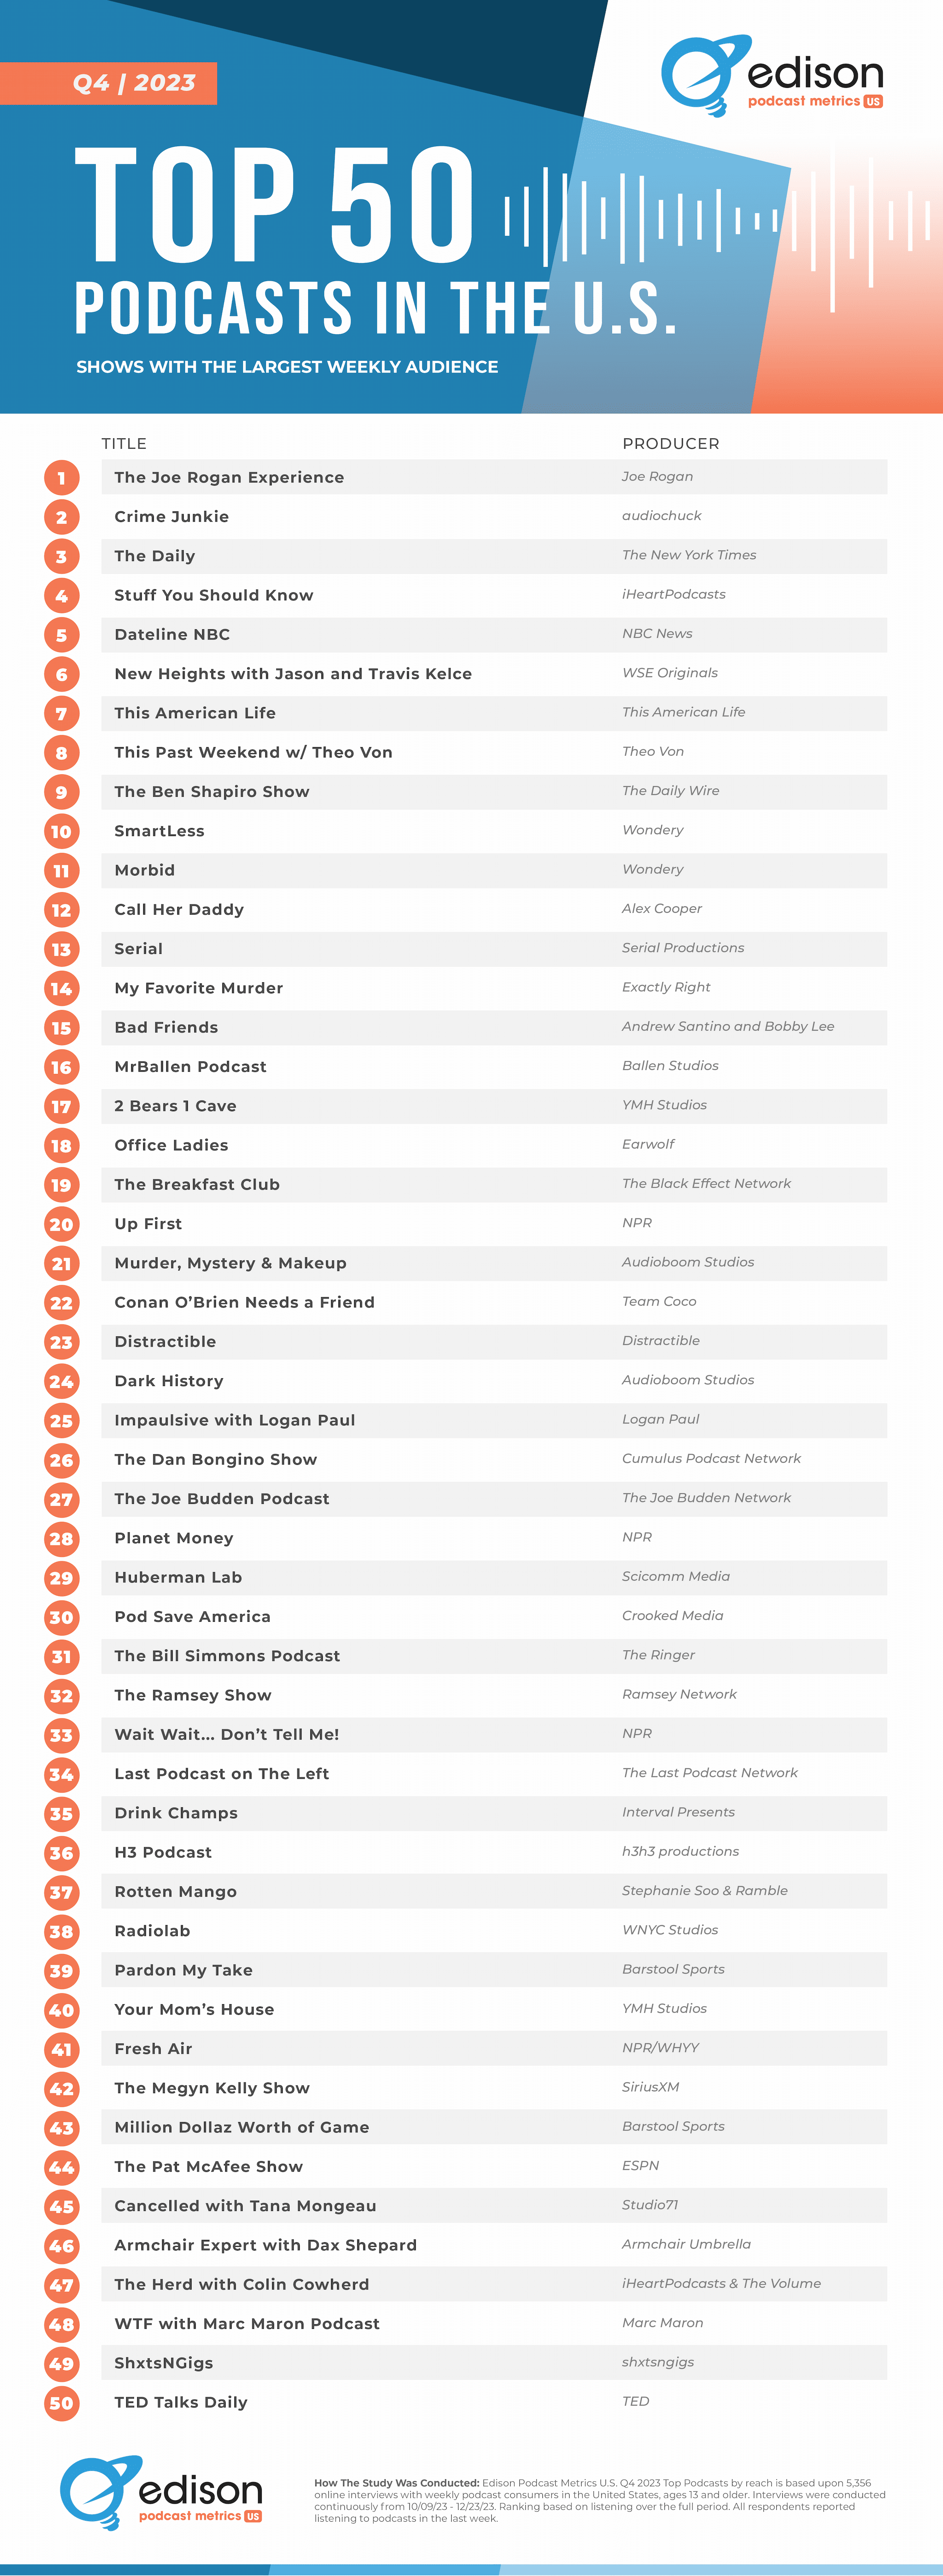 Top 50 podcasts in the United States for Q4 2023, according to Edison Research